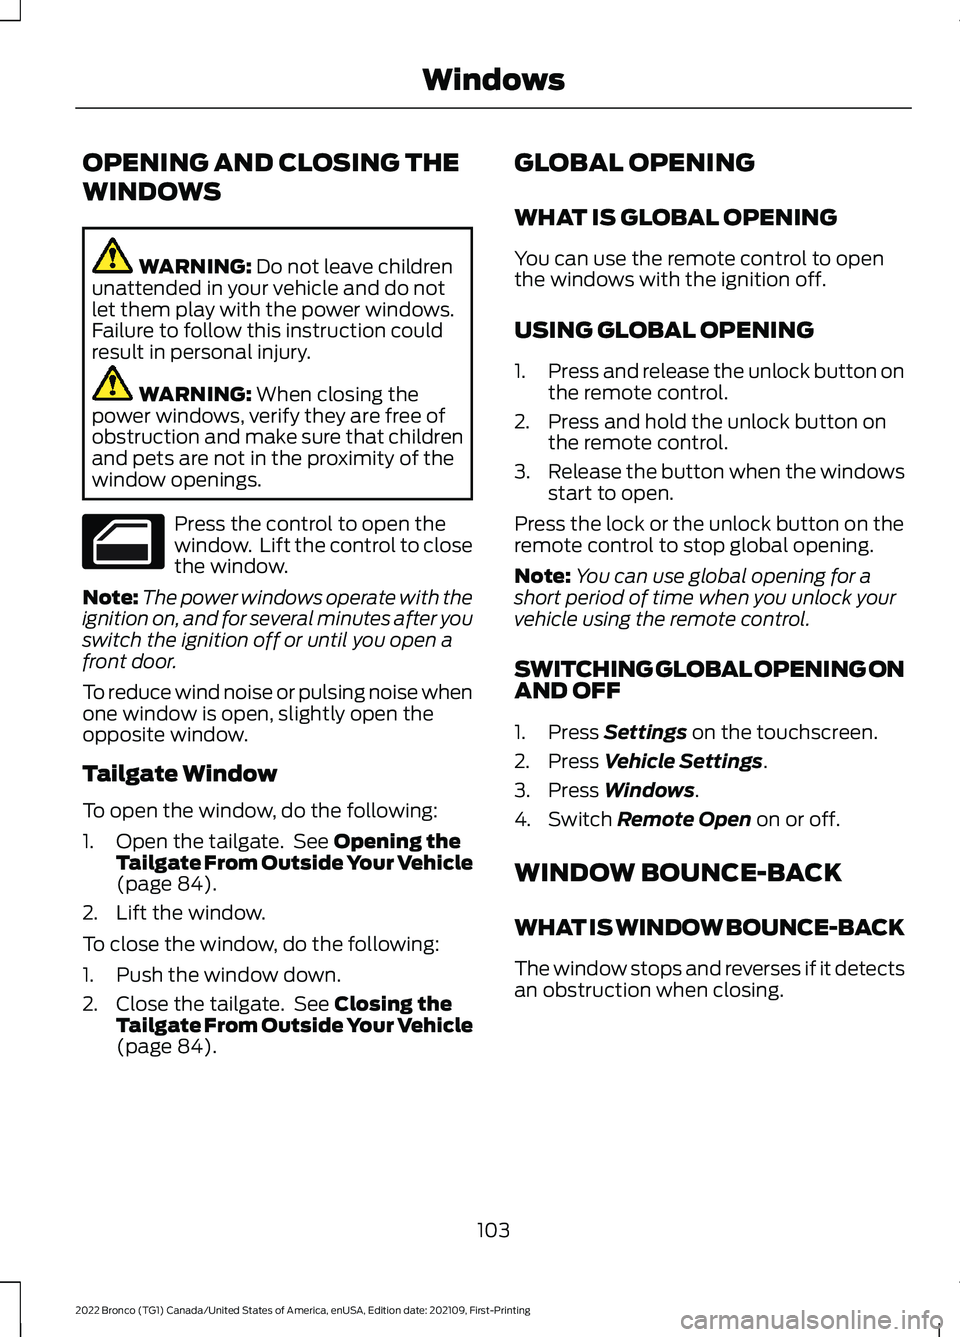 FORD BRONCO 2022 User Guide OPENING AND CLOSING THE
WINDOWS
WARNING: Do not leave childrenunattended in your vehicle and do notlet them play with the power windows.Failure to follow this instruction couldresult in personal injur